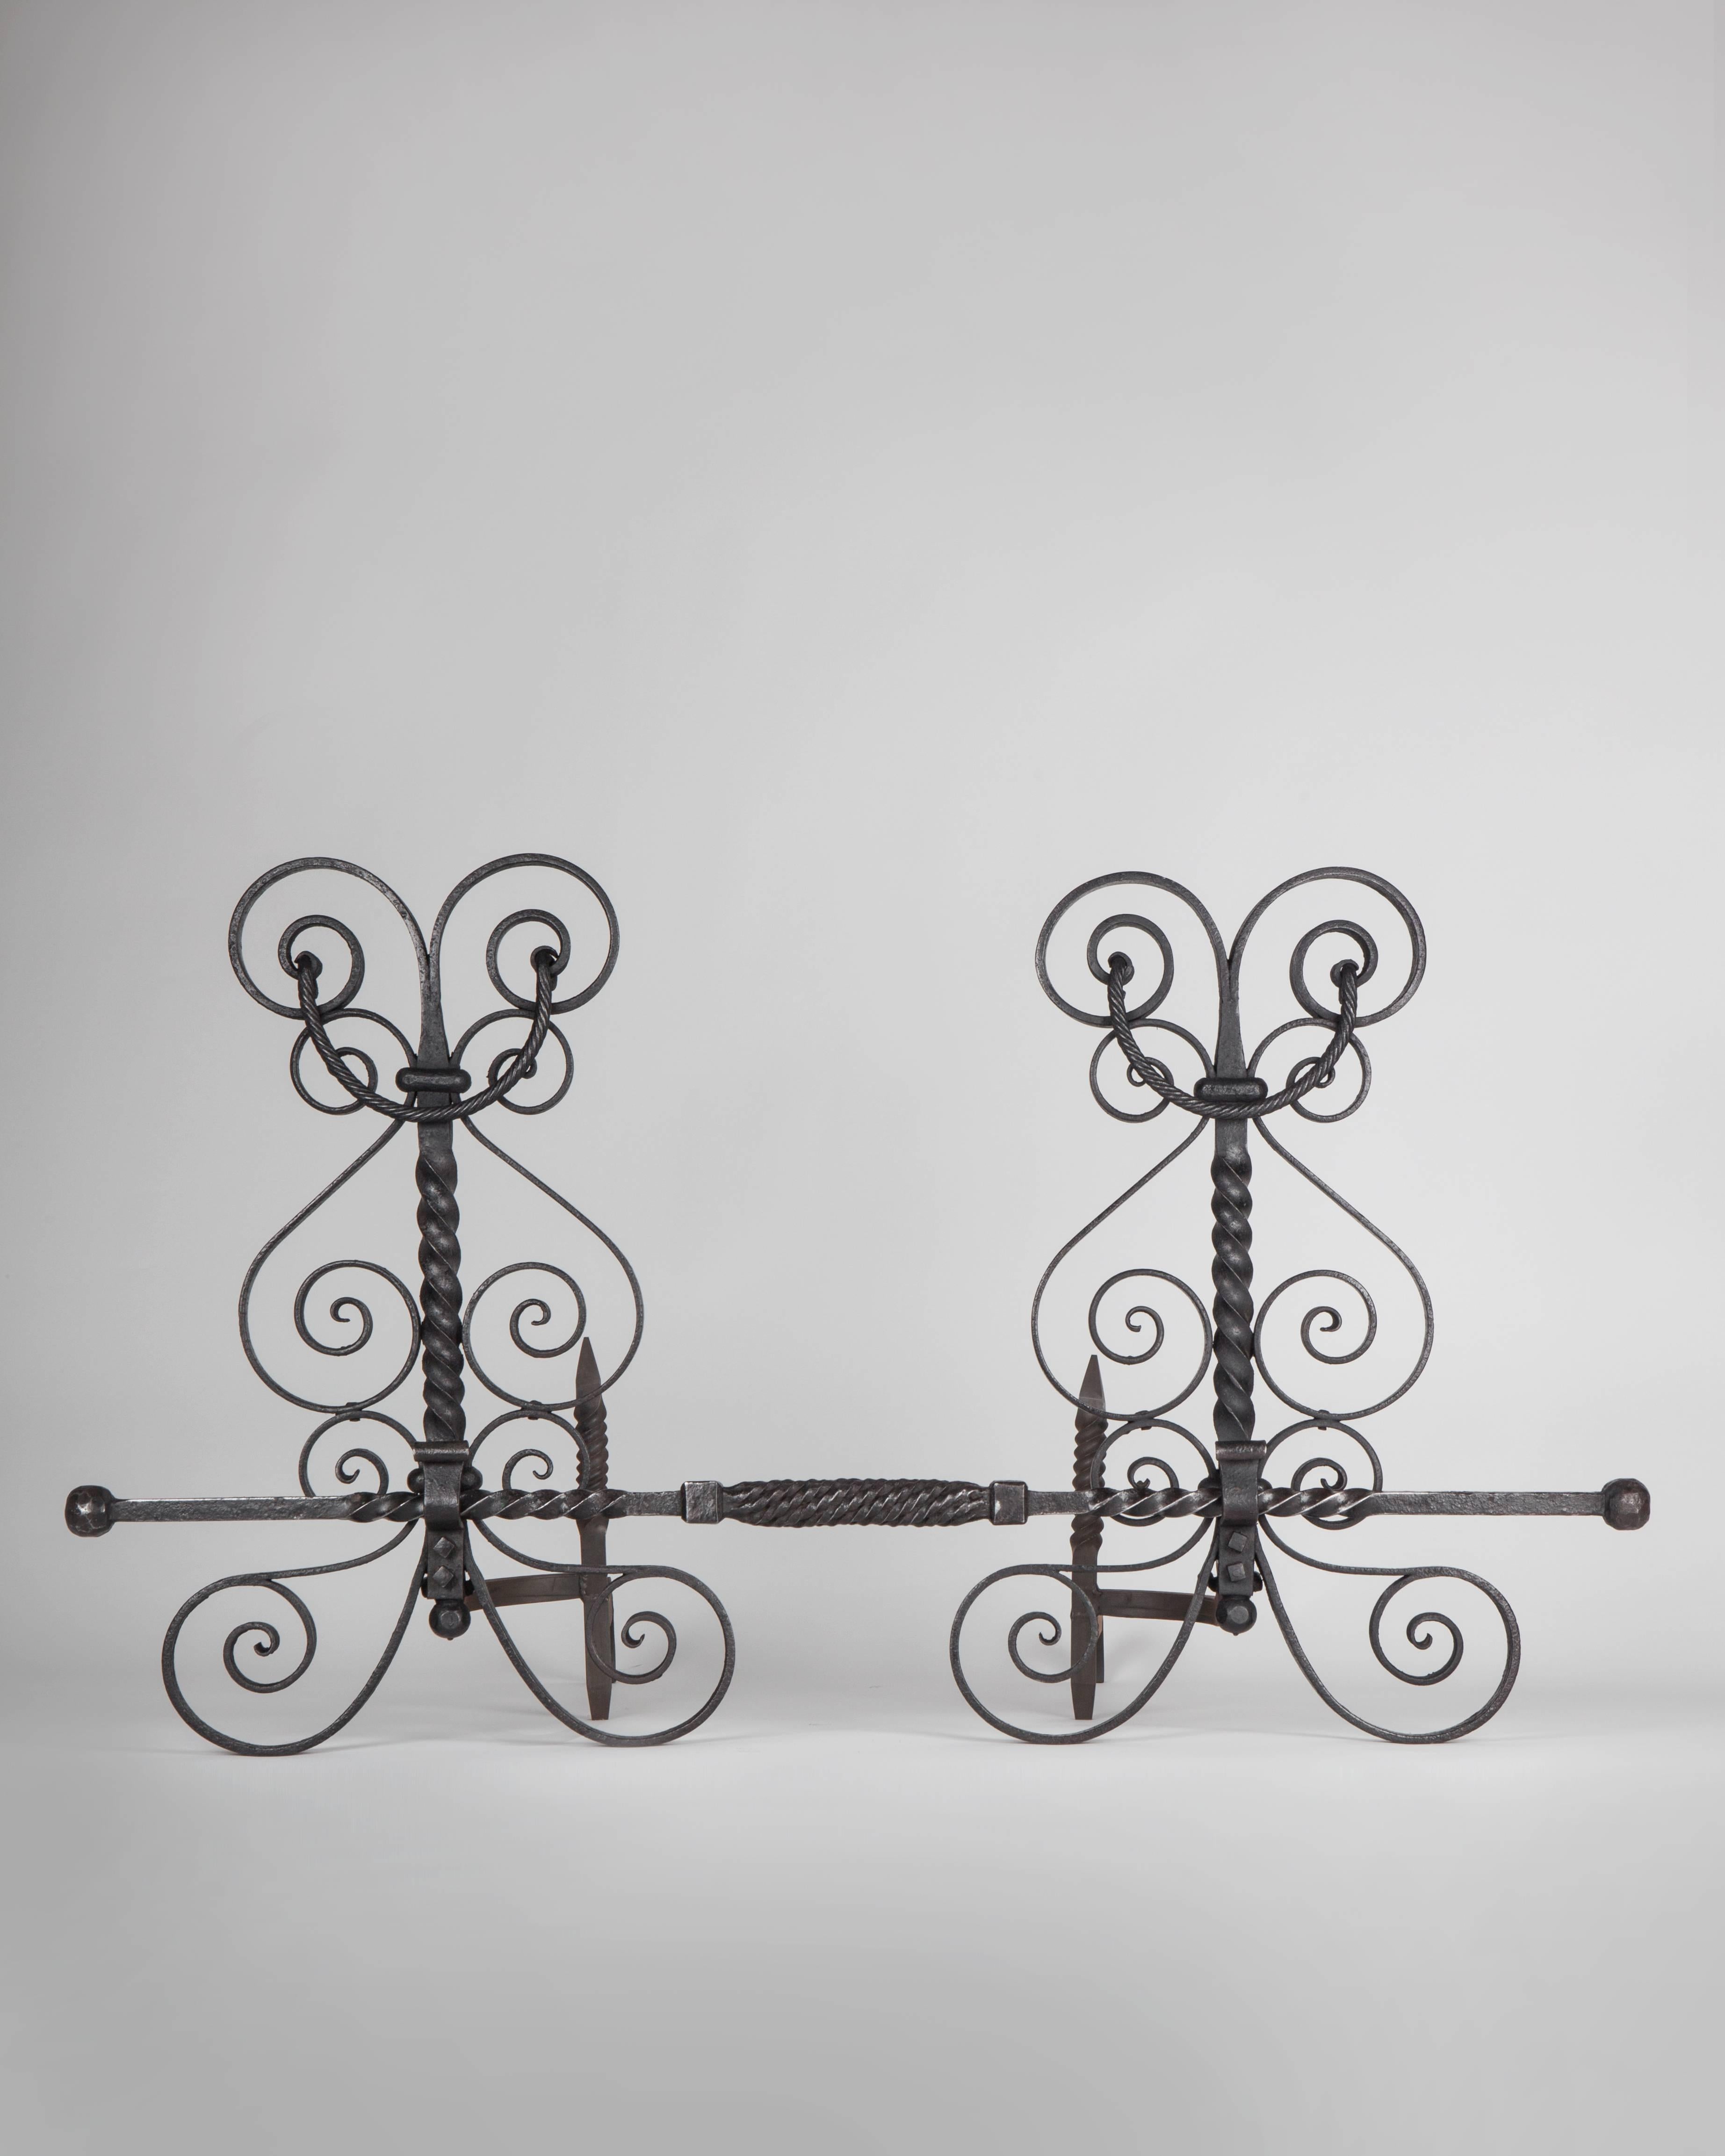 AFP0545
A pair of antique wrought iron andirons with elaborate scroll and twist details, complete with an original fender crossbar.

Dimensions:
Overall: 25